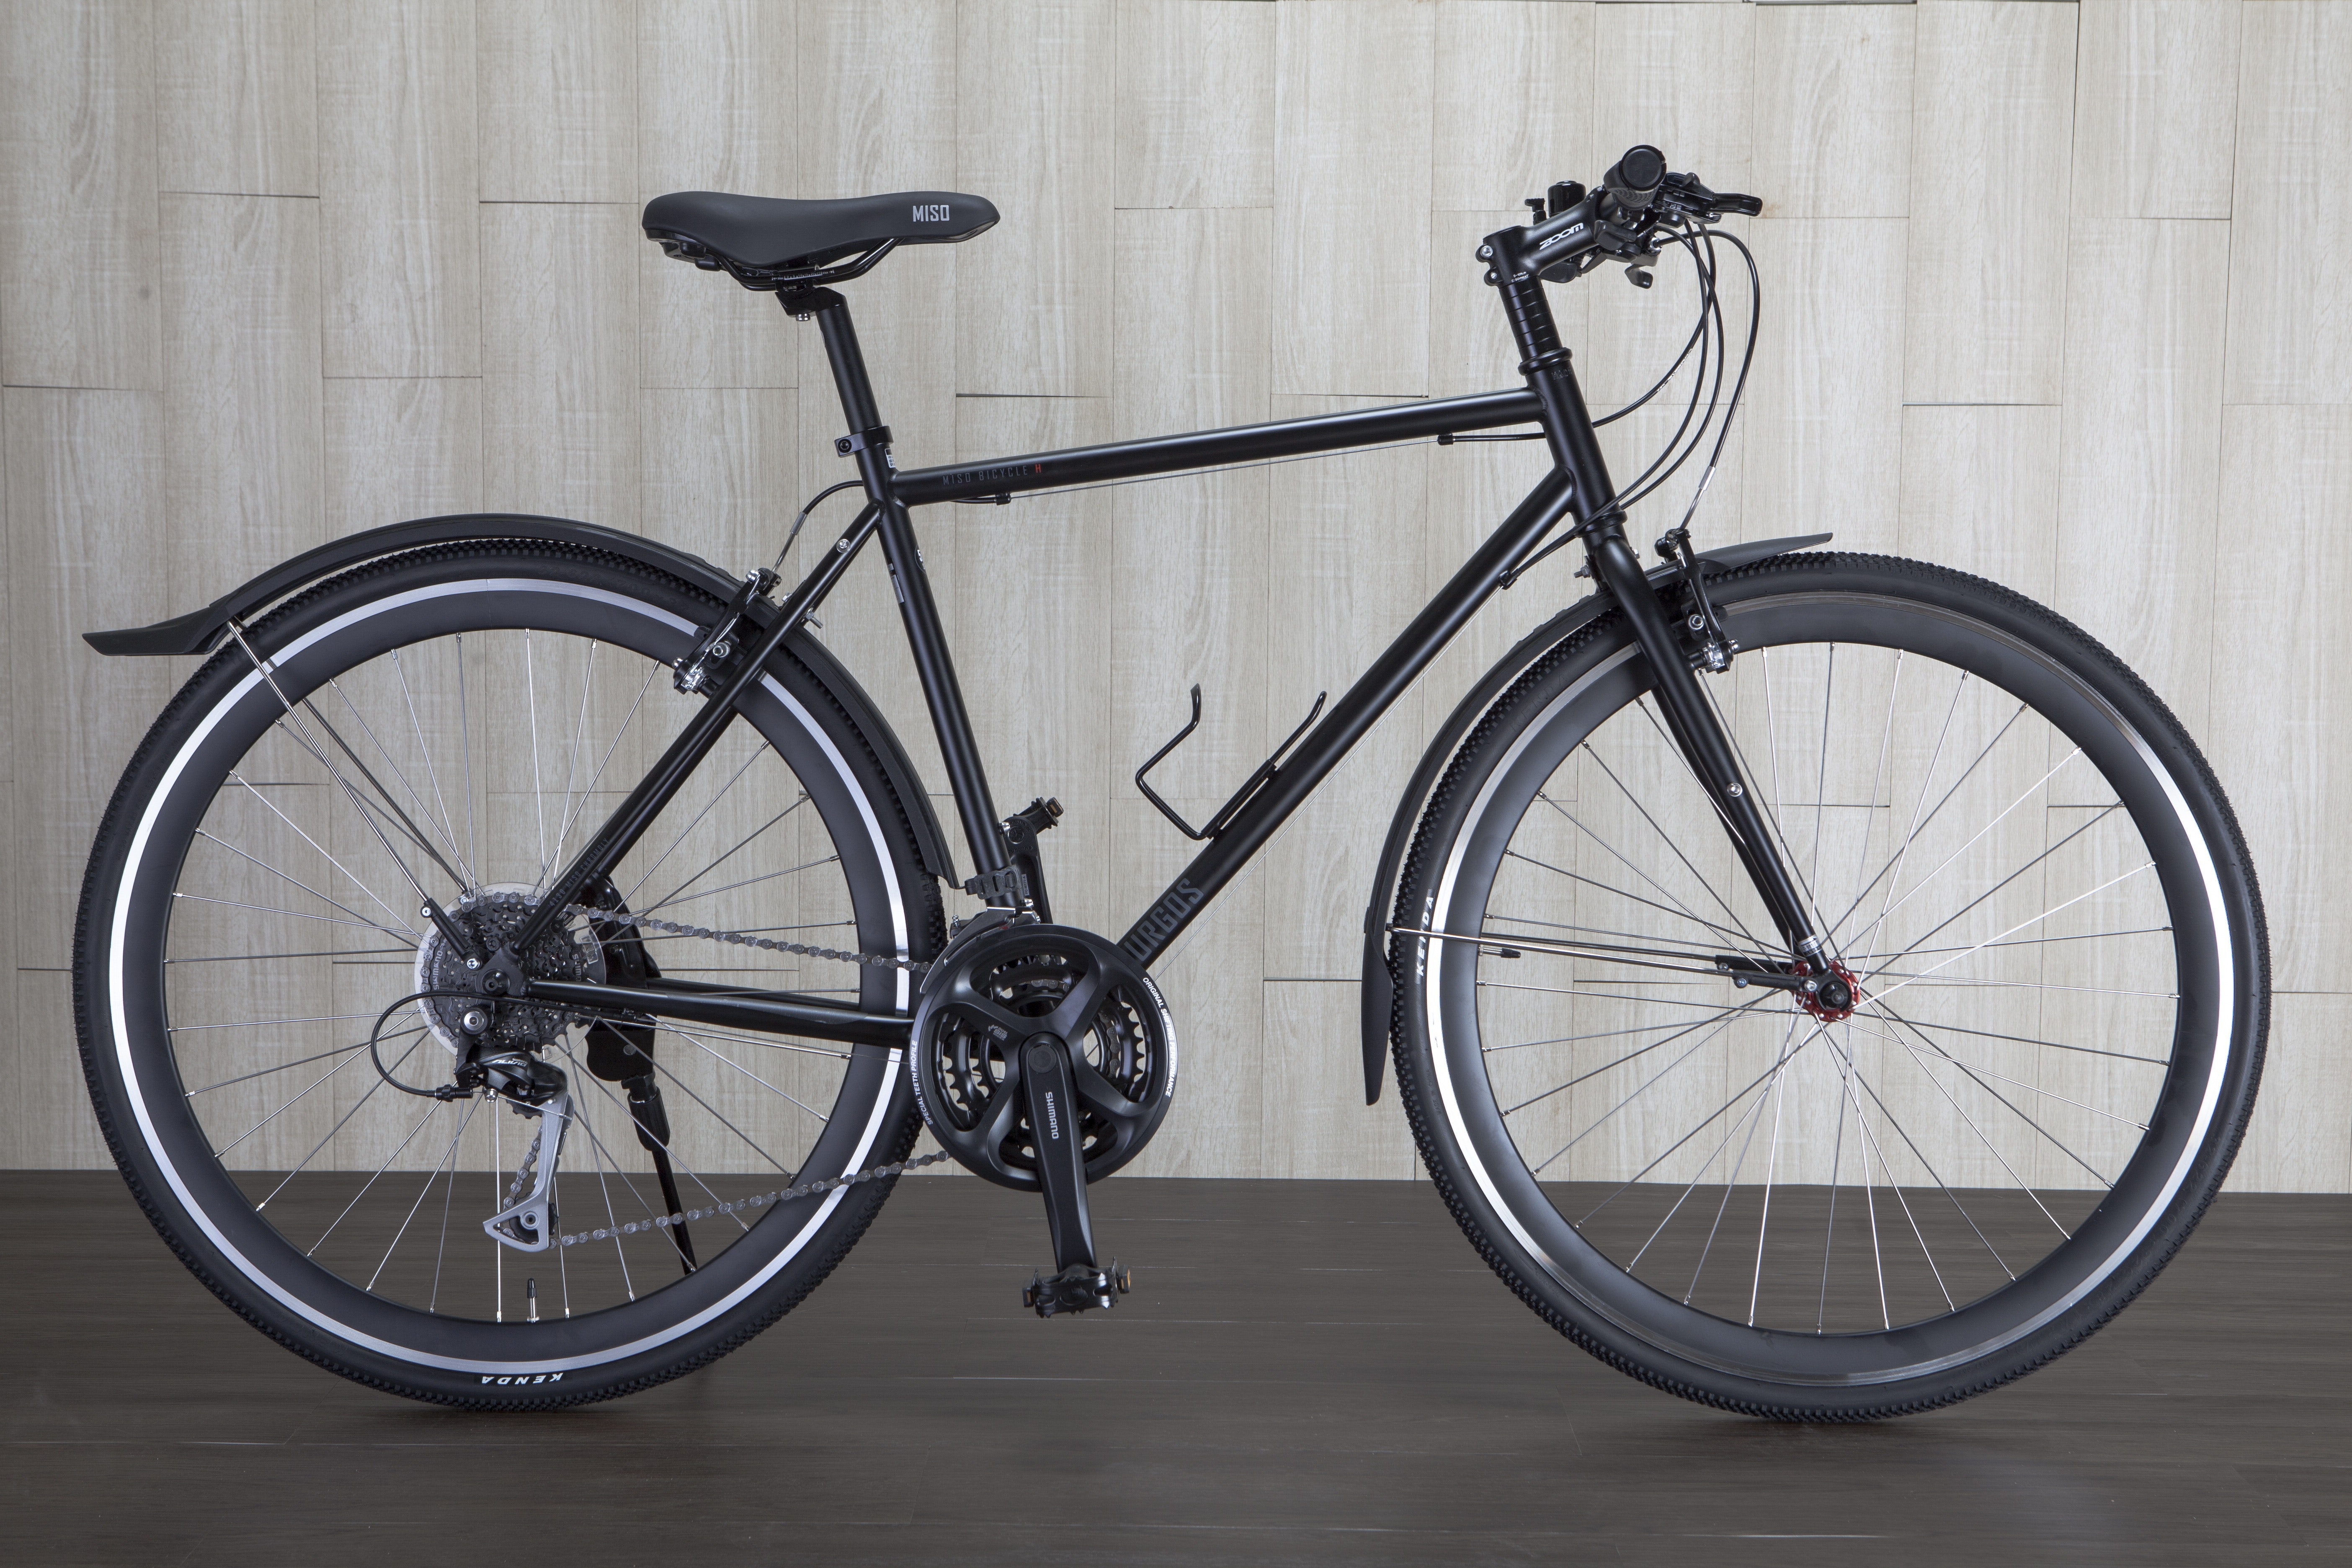 A bicycle with a black bike frame sits in front of a wall with light gray wooden panels and dark wood floors